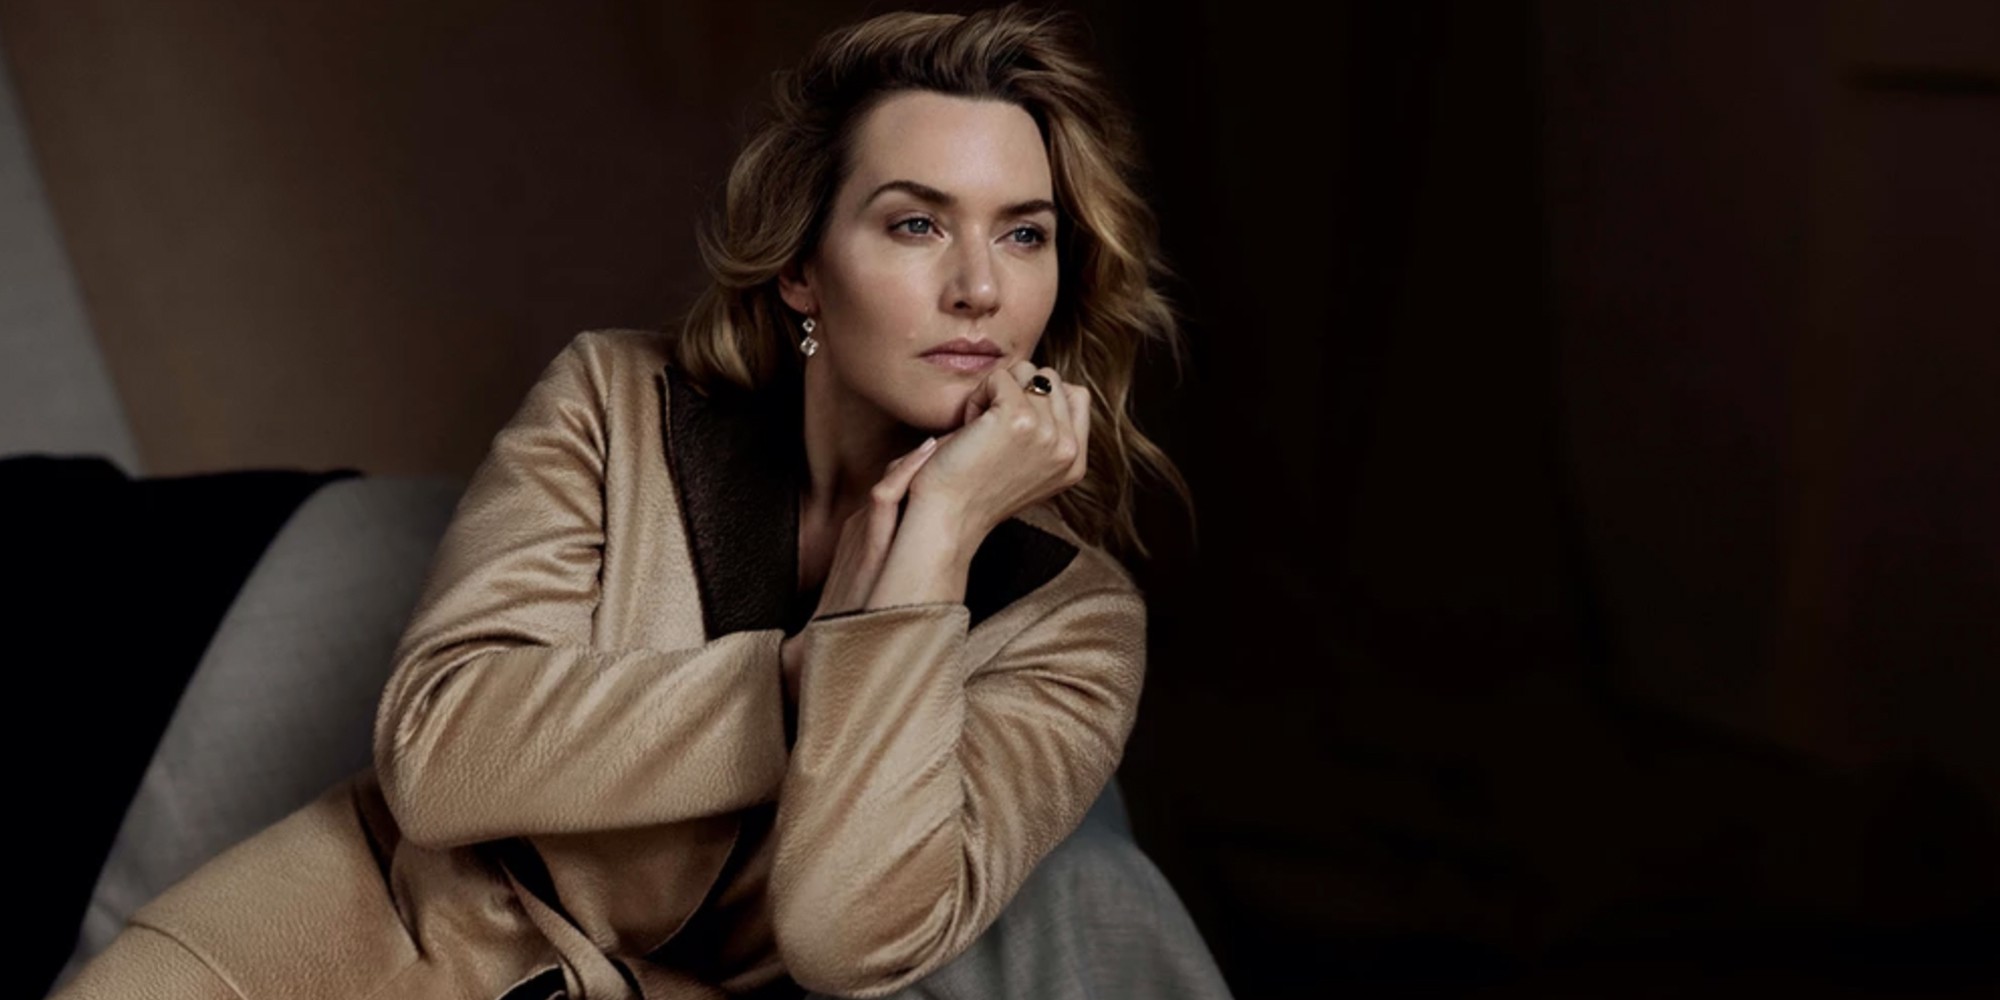 DAKS 125TH ANNIVERSARY COLLECTION FILM STARRING KATE WINSLET